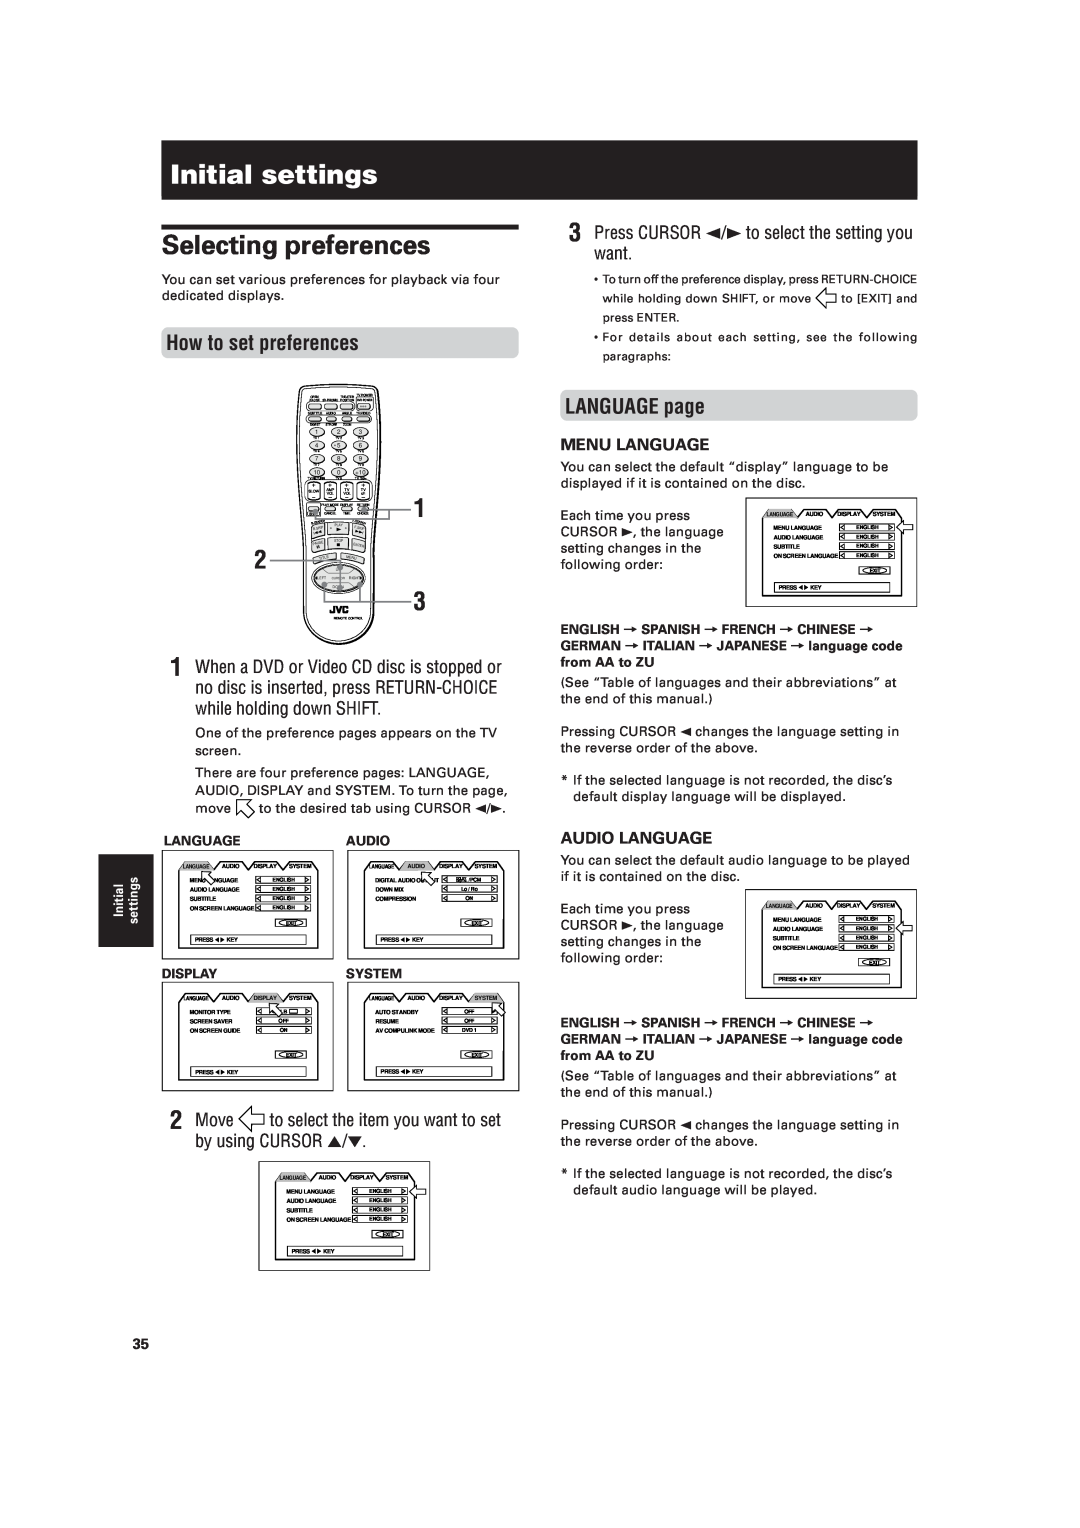 JVC XV-521BK manual Initial settings, Selecting preferences, How to set preferences, LANGUAGE page 